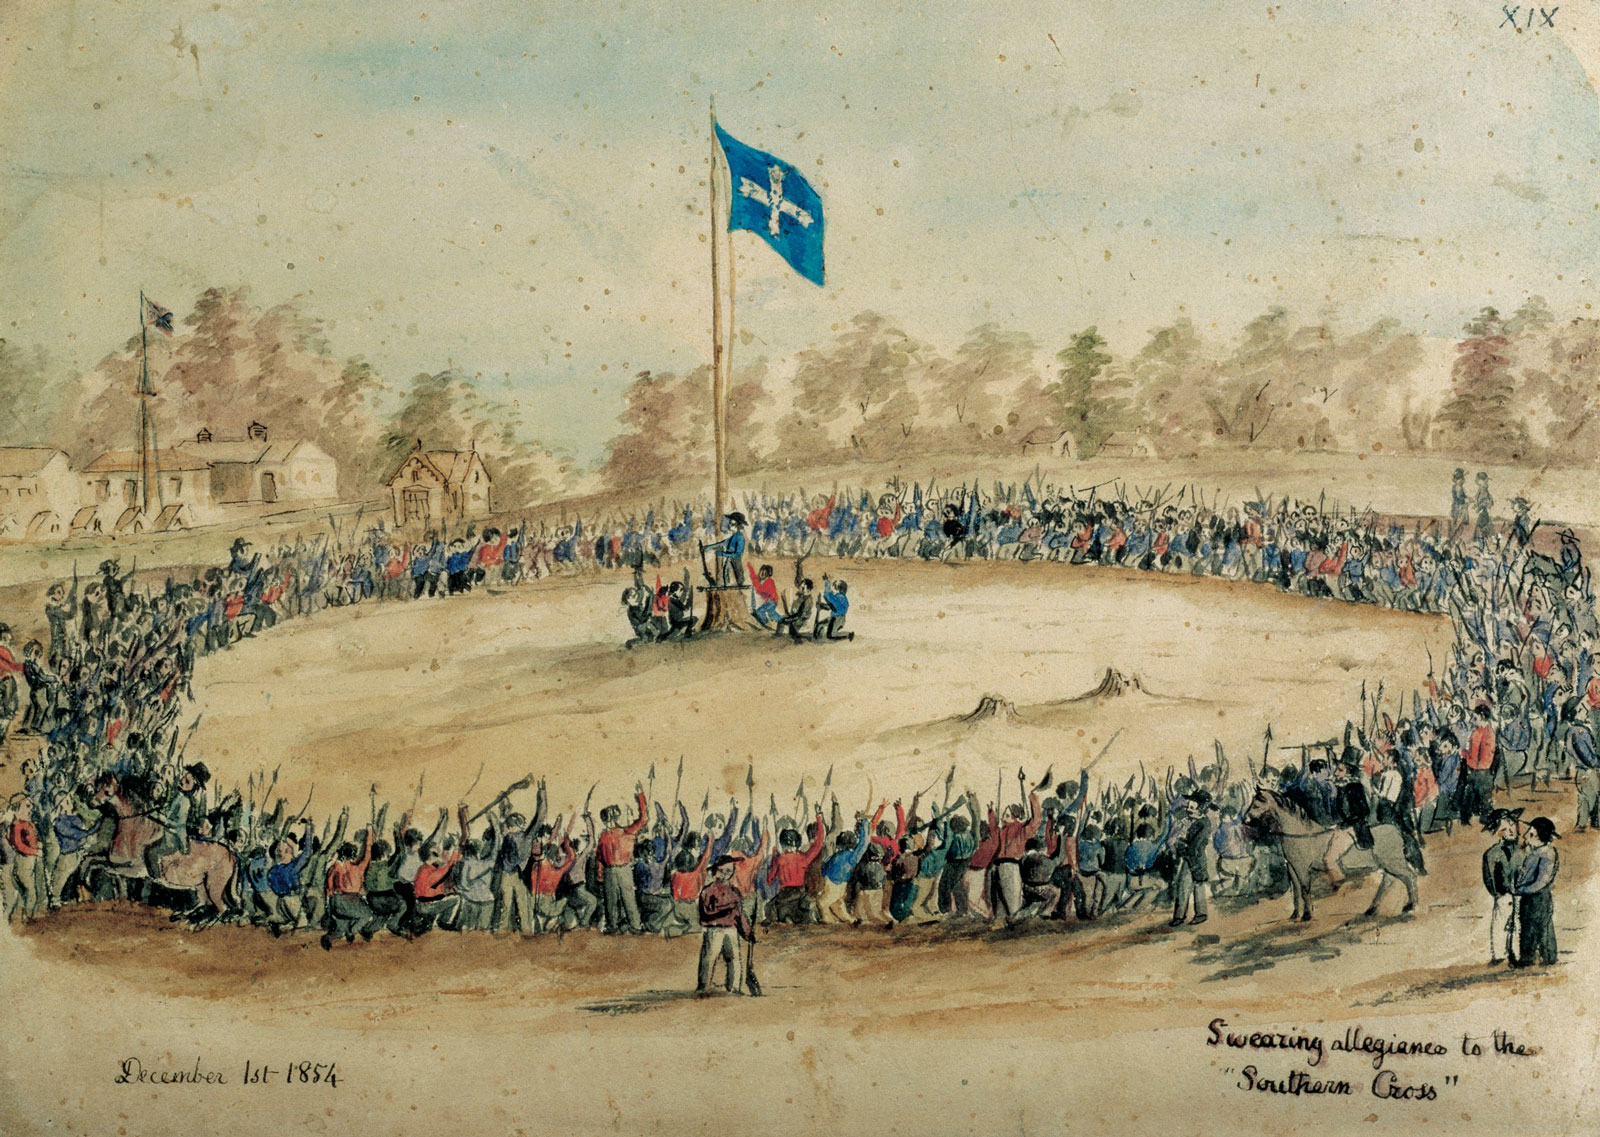 Swearing Allegiance to the Southern Cross, watercolour by Charles A Doudiet, 1 December 1854